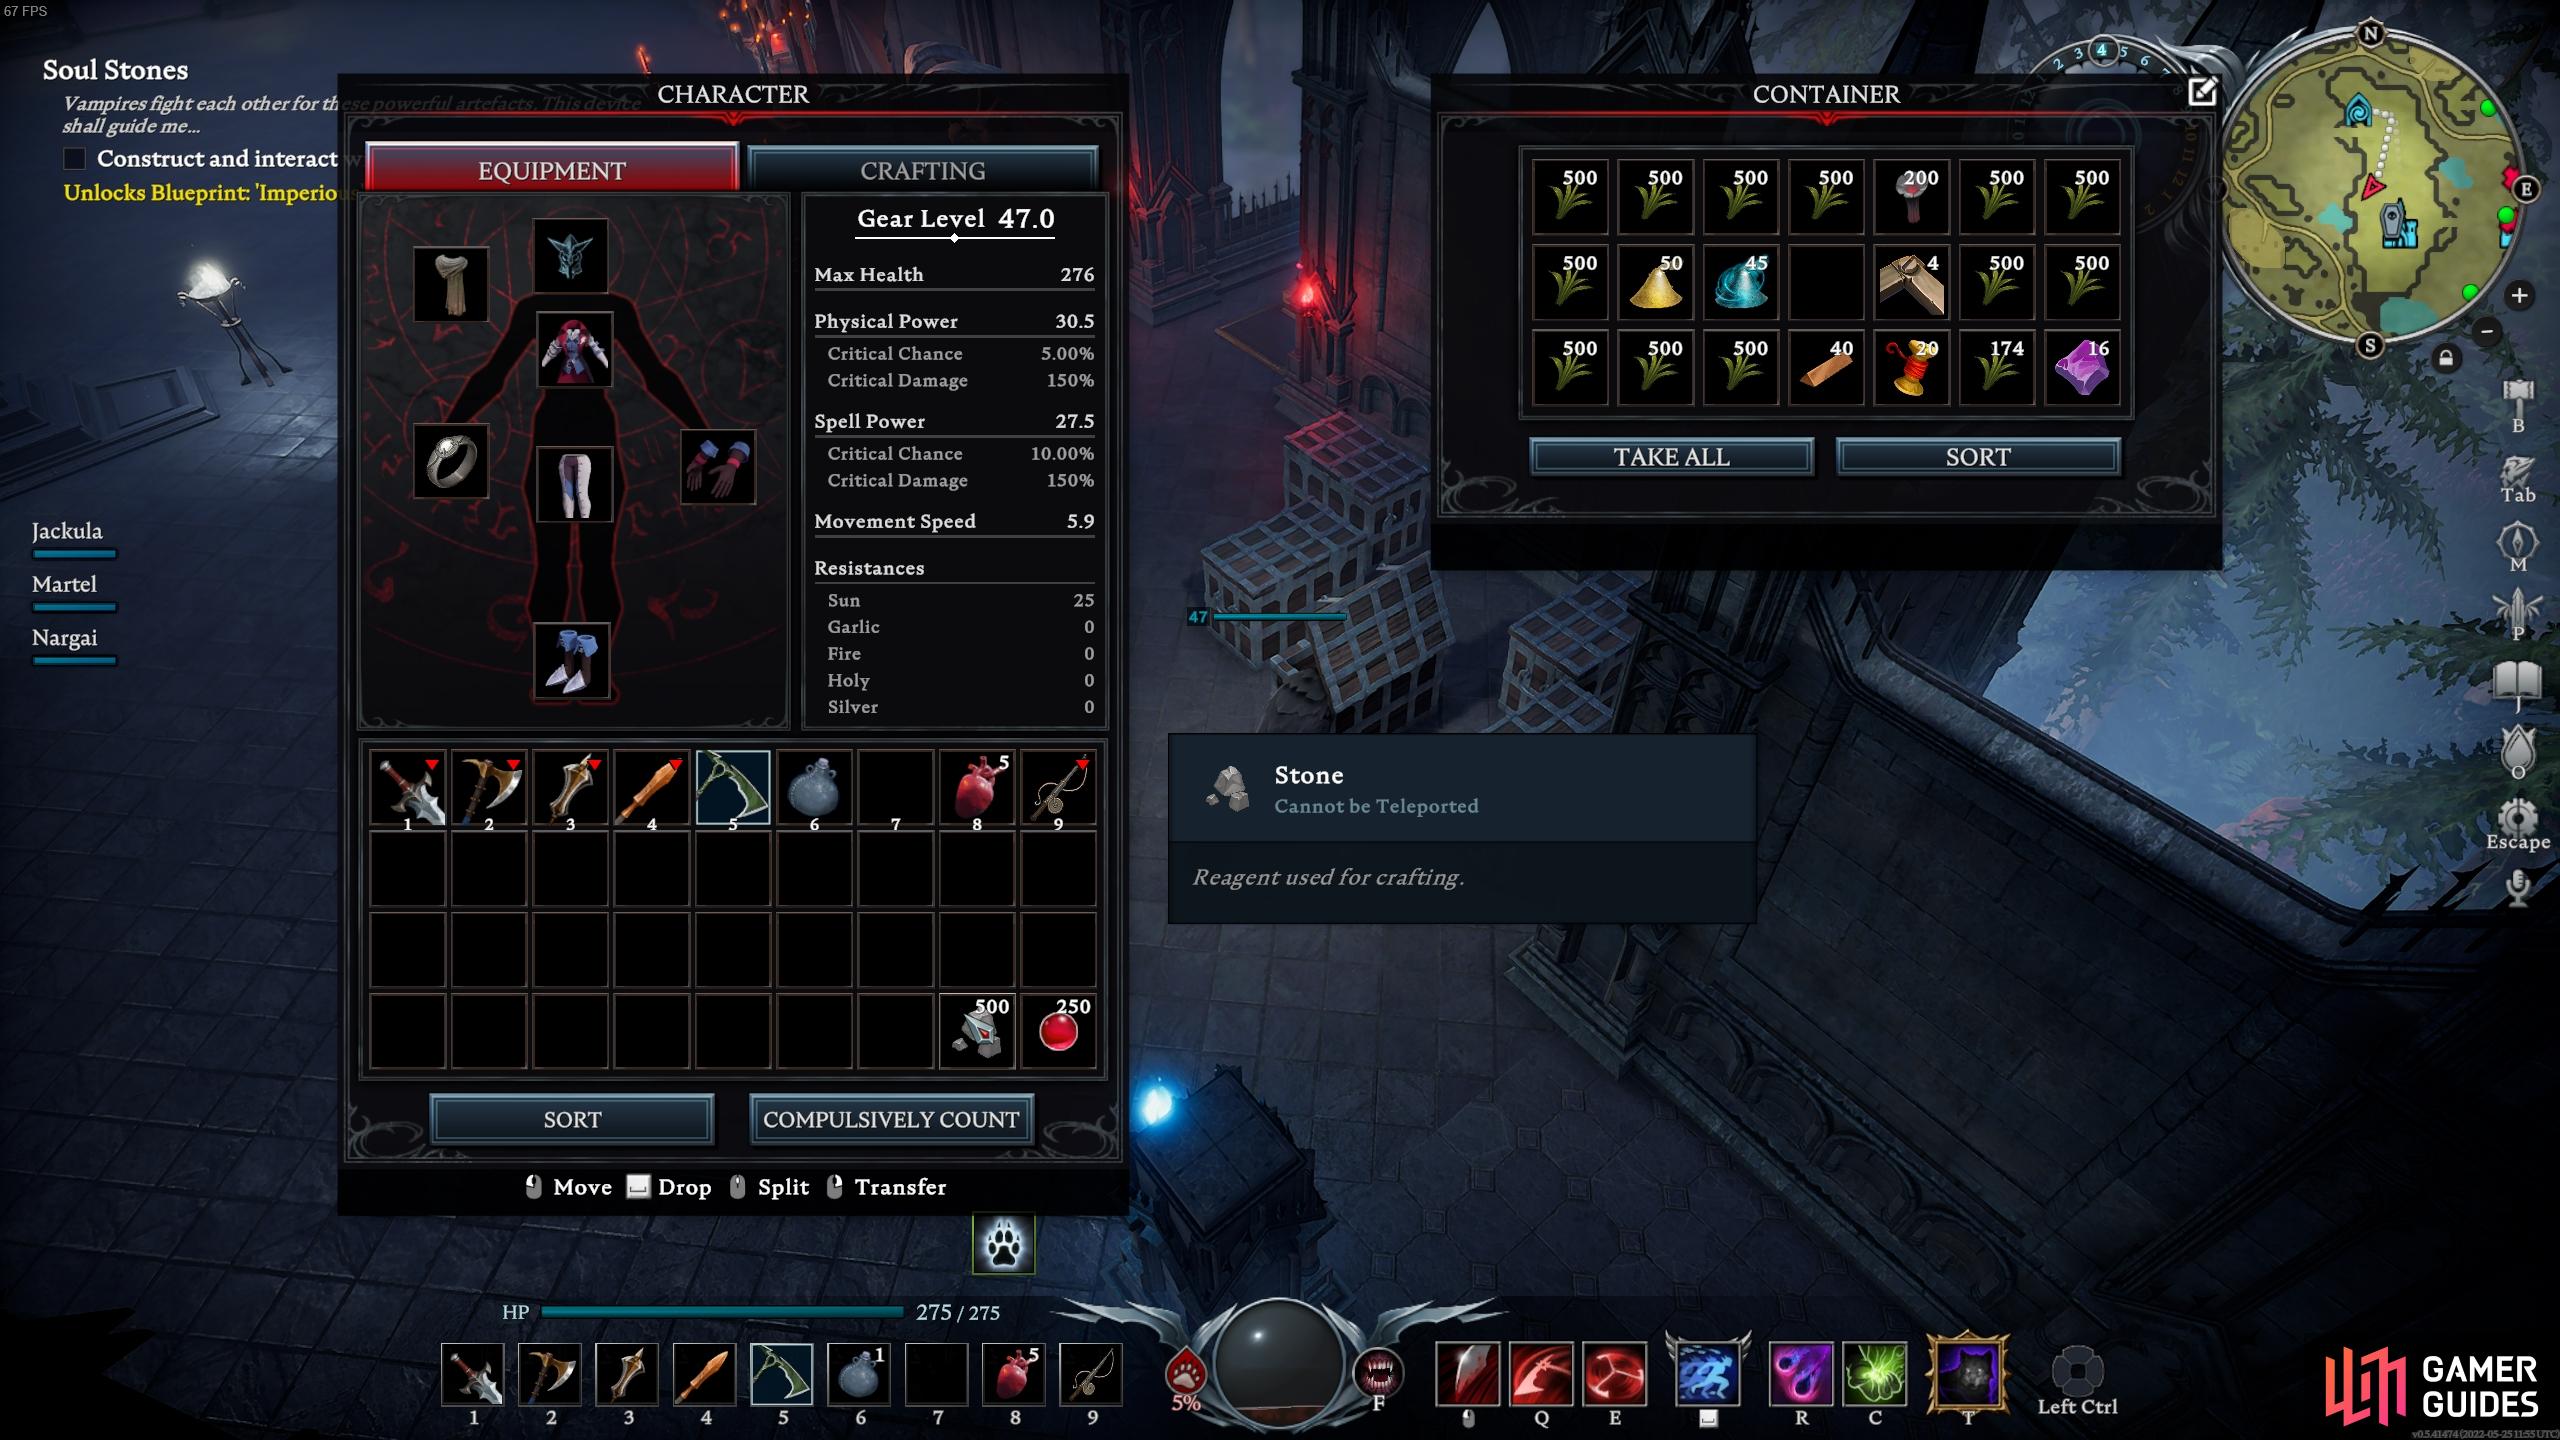 You can hover over any item to check whether the Cannot Be Teleported text is present, and store it in a chest if so.